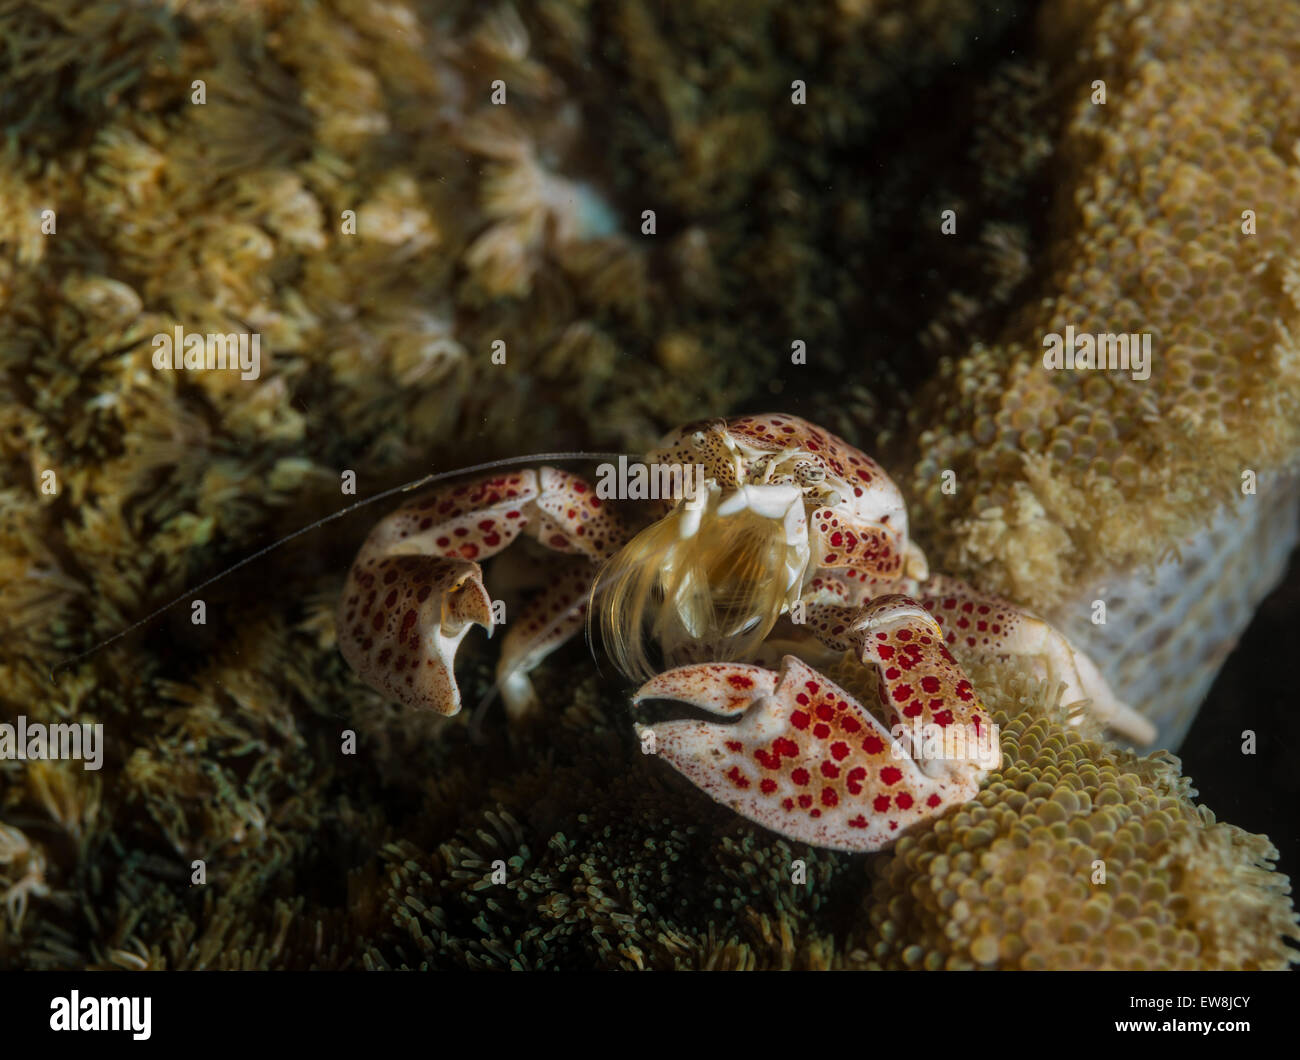 Porcelain crab on an anemone Stock Photo